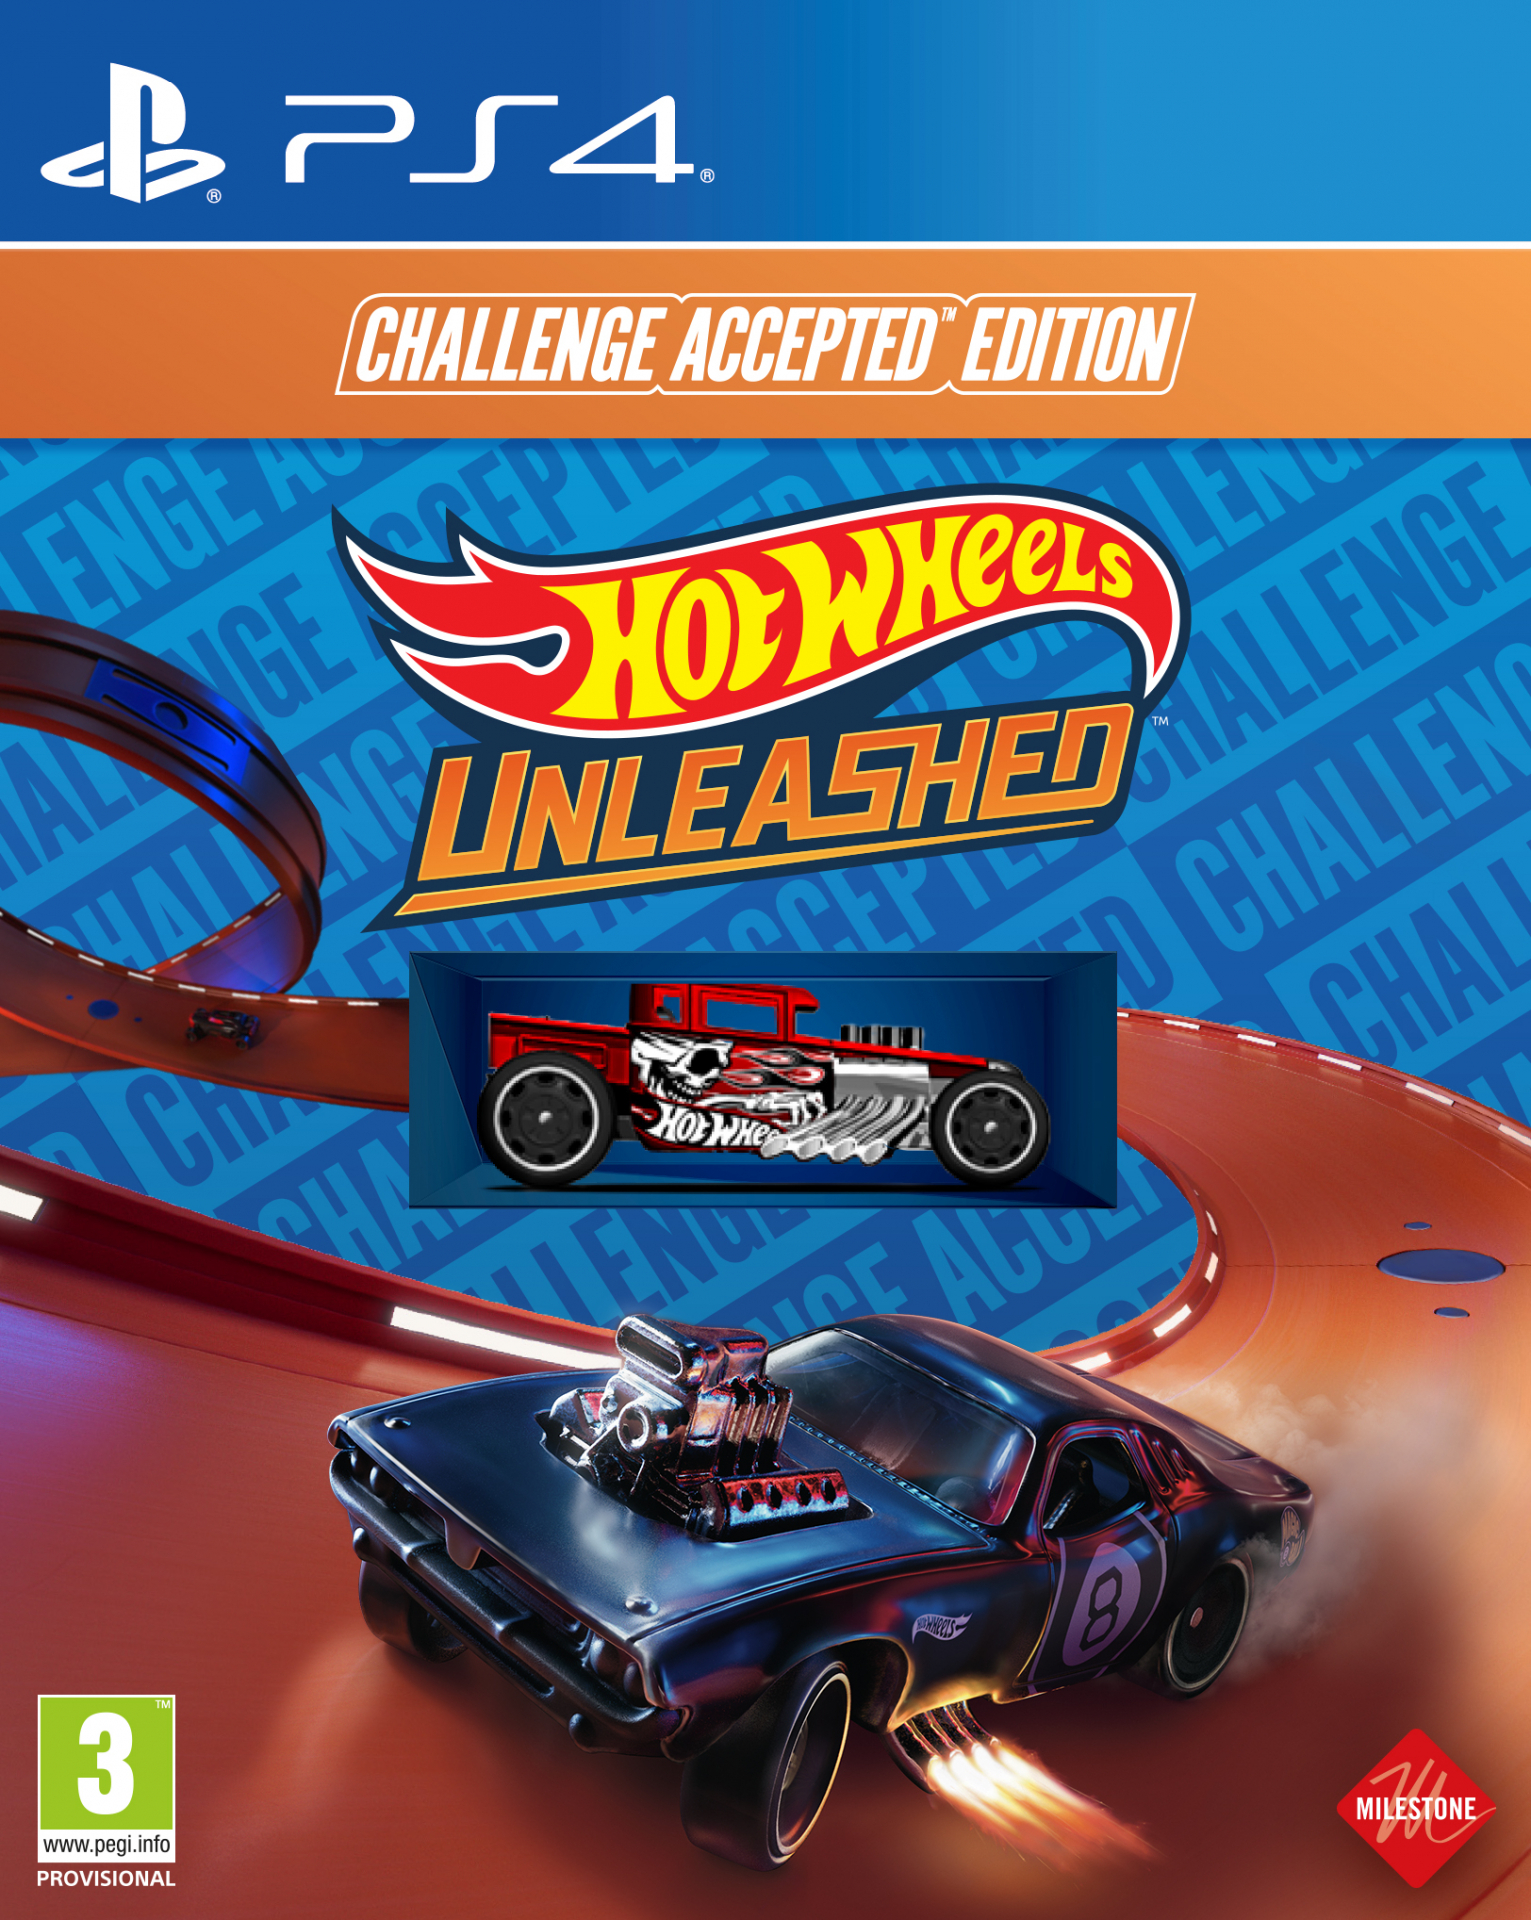 Milestone Hot Wheels Unleashed - Challenge Accepted Edition PlayStation 4